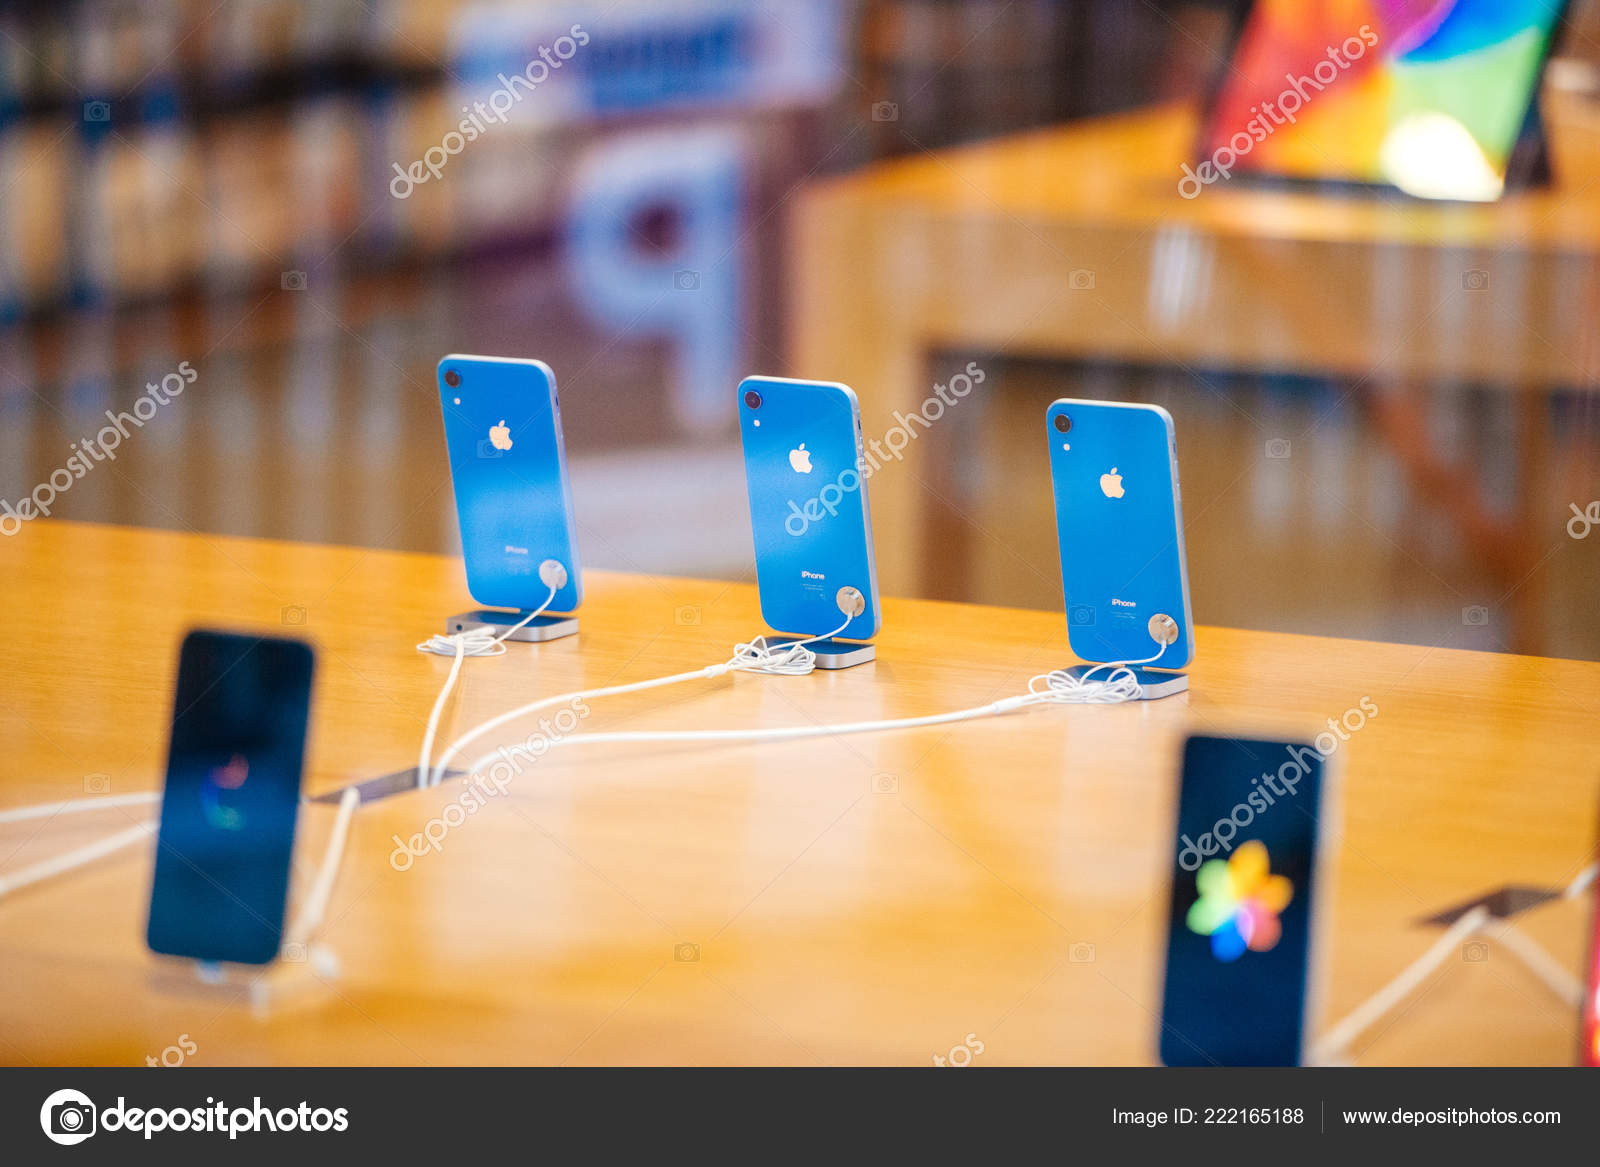 Apple Store Computers